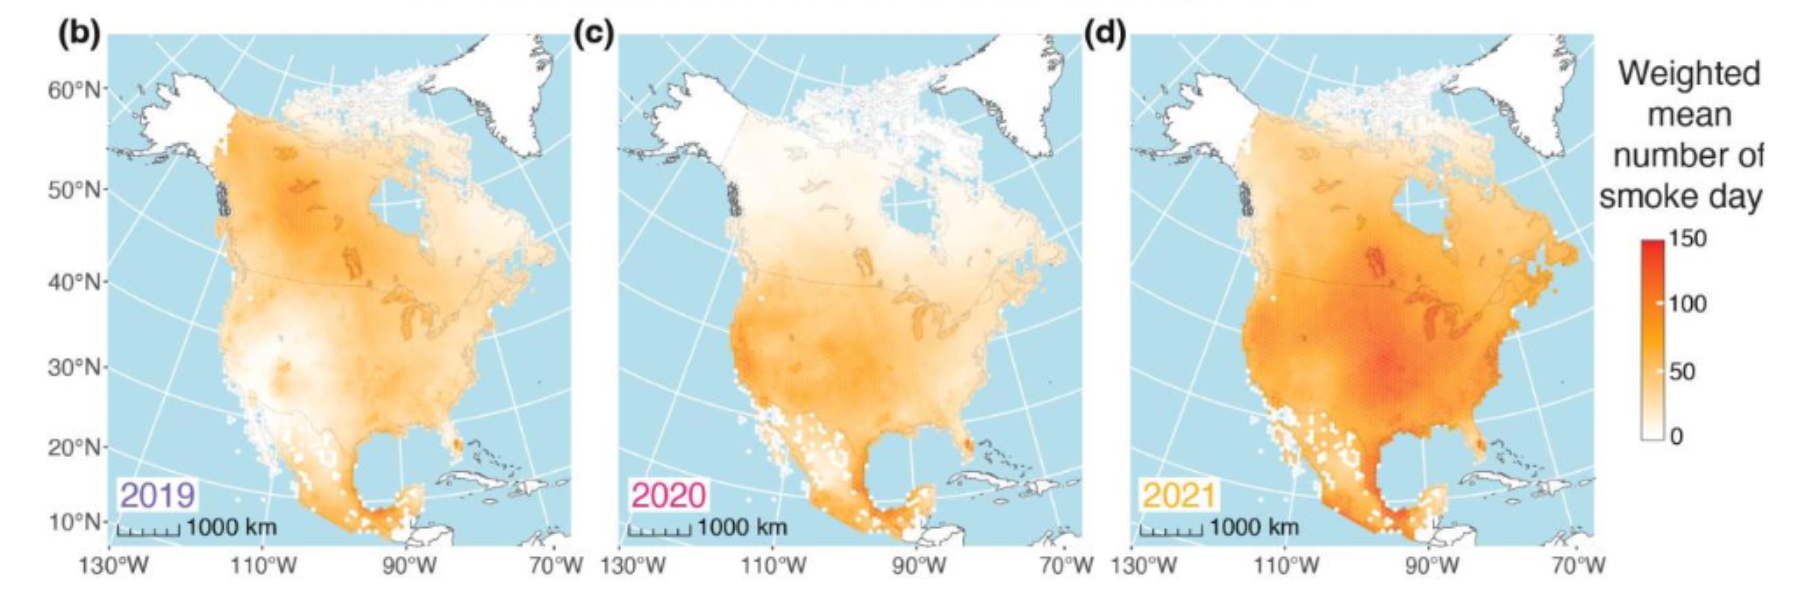 These maps from the study show the mean number of smoke-days across North America for (b) 2019, (c) 2020, and (d) 2021. (EPSG)